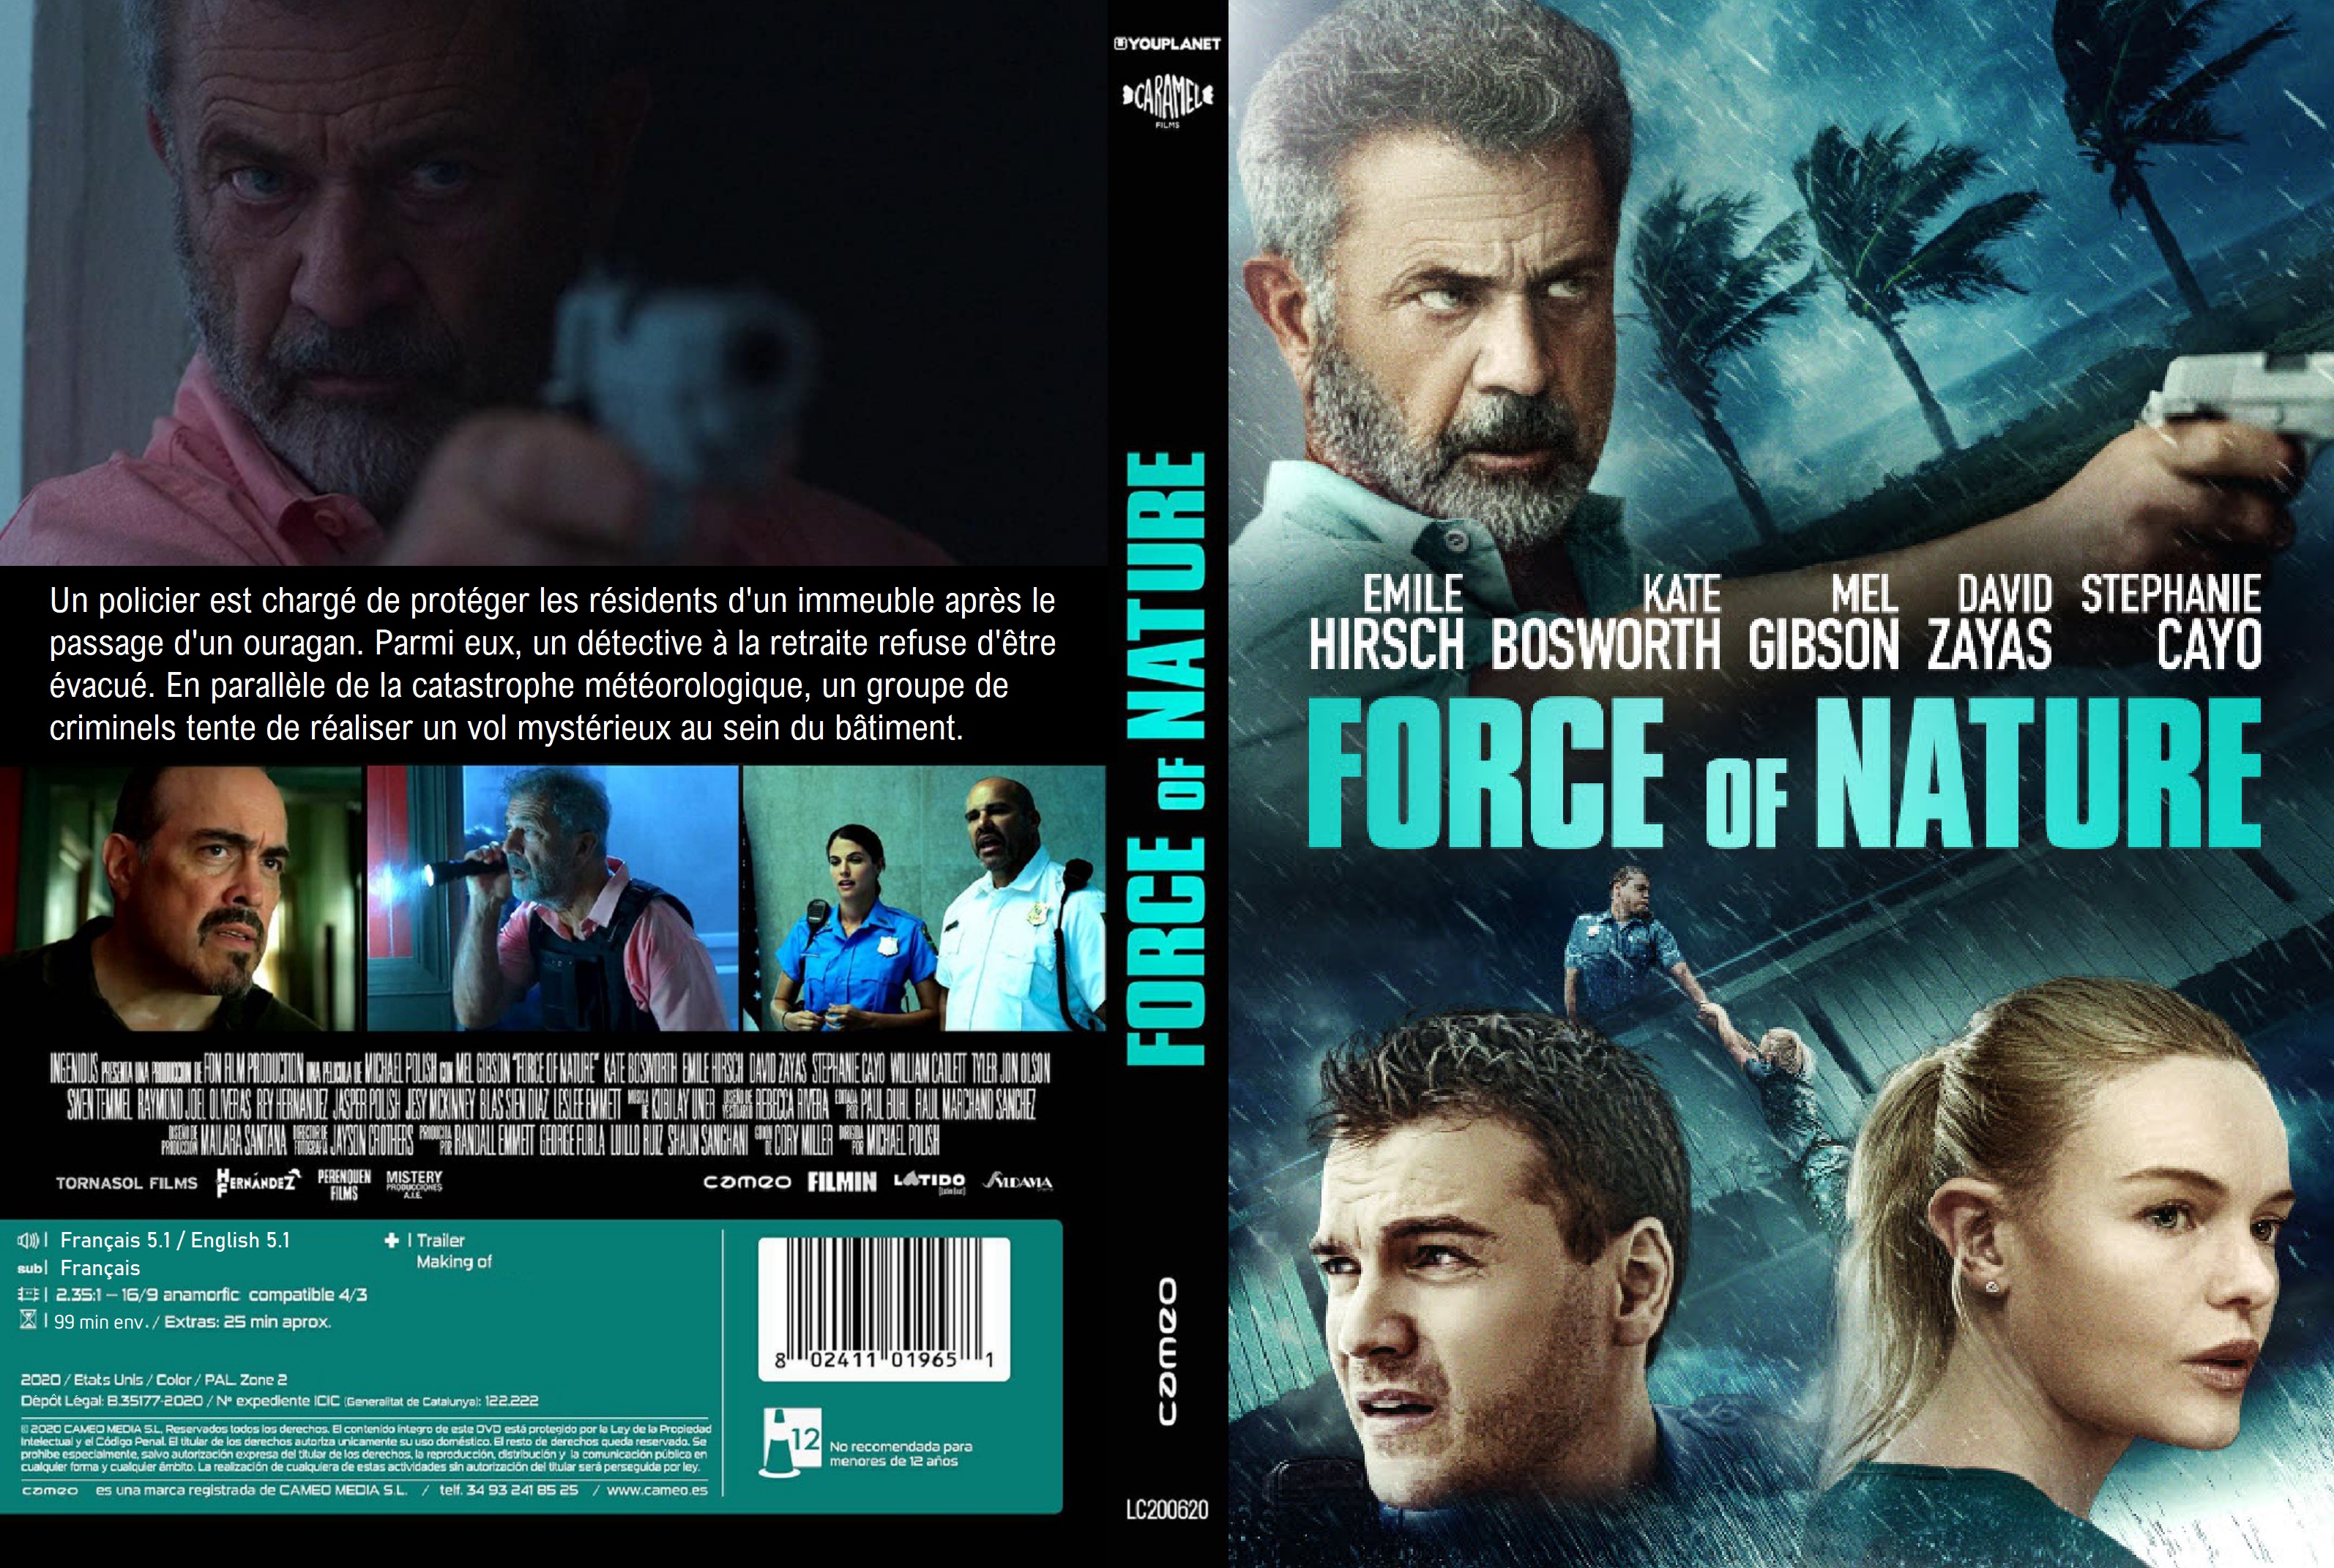 Jaquette DVD Force of Nature custom